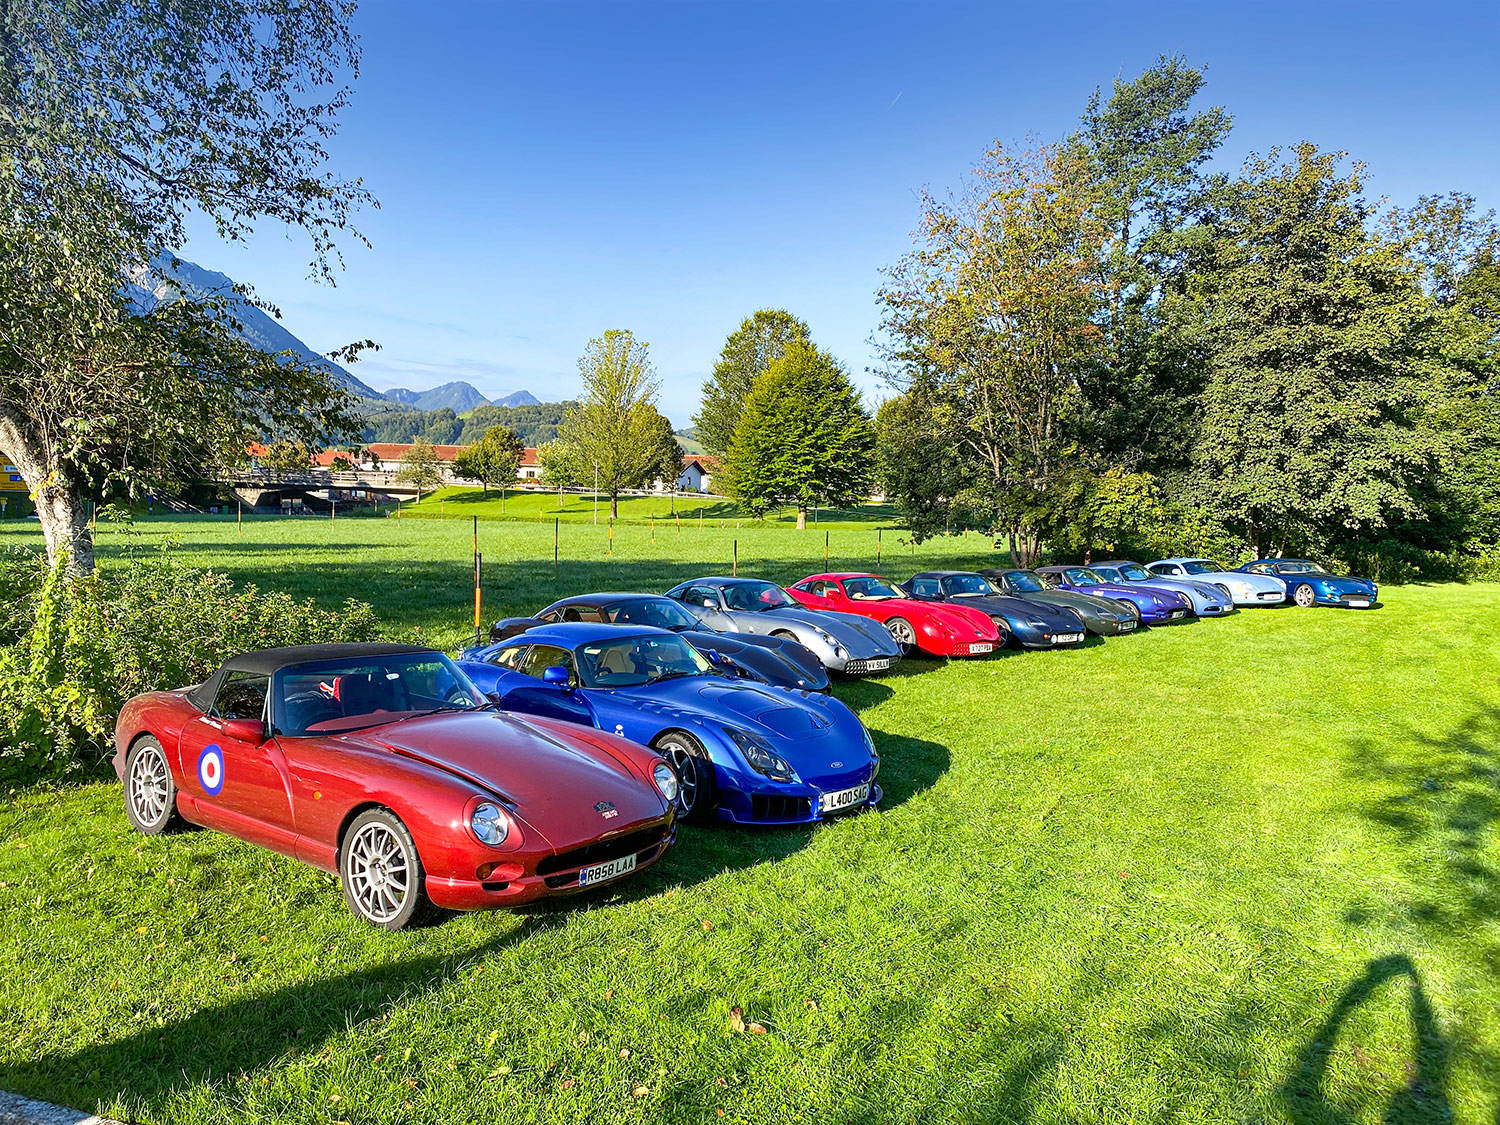 Das Falkenstein Hotel Germany TVR lineup at the hotel